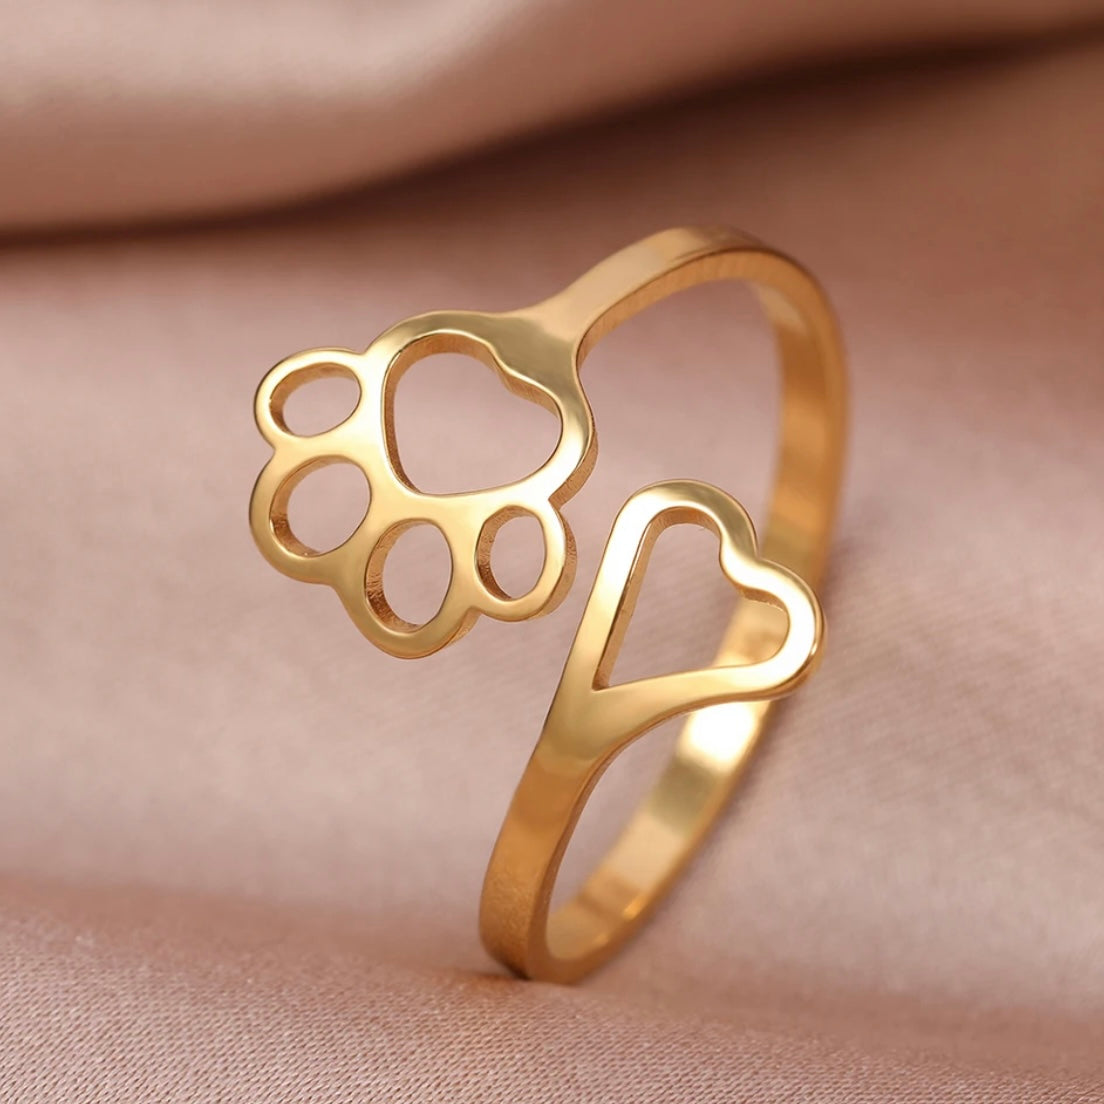 Pets remembrance ring